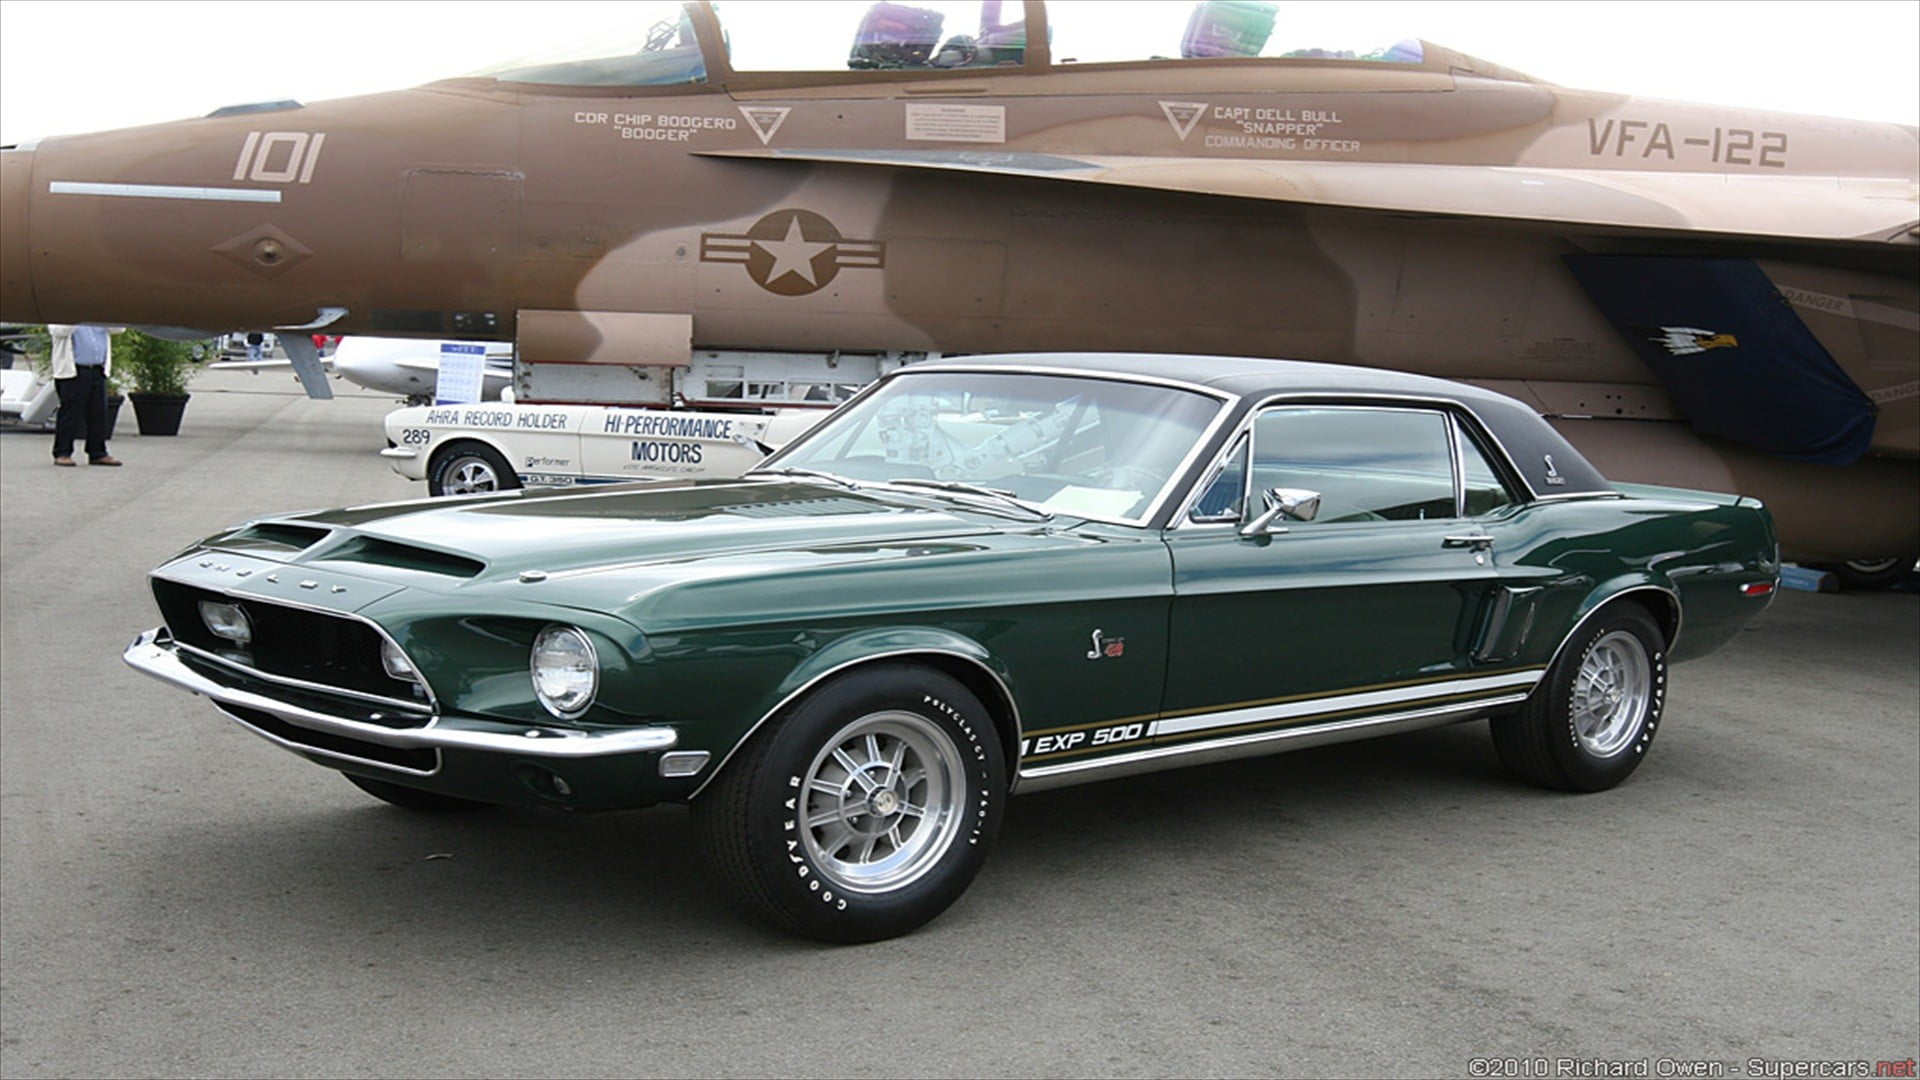 green classic Ford Mustang Shelby coupe, car, mode of transportation